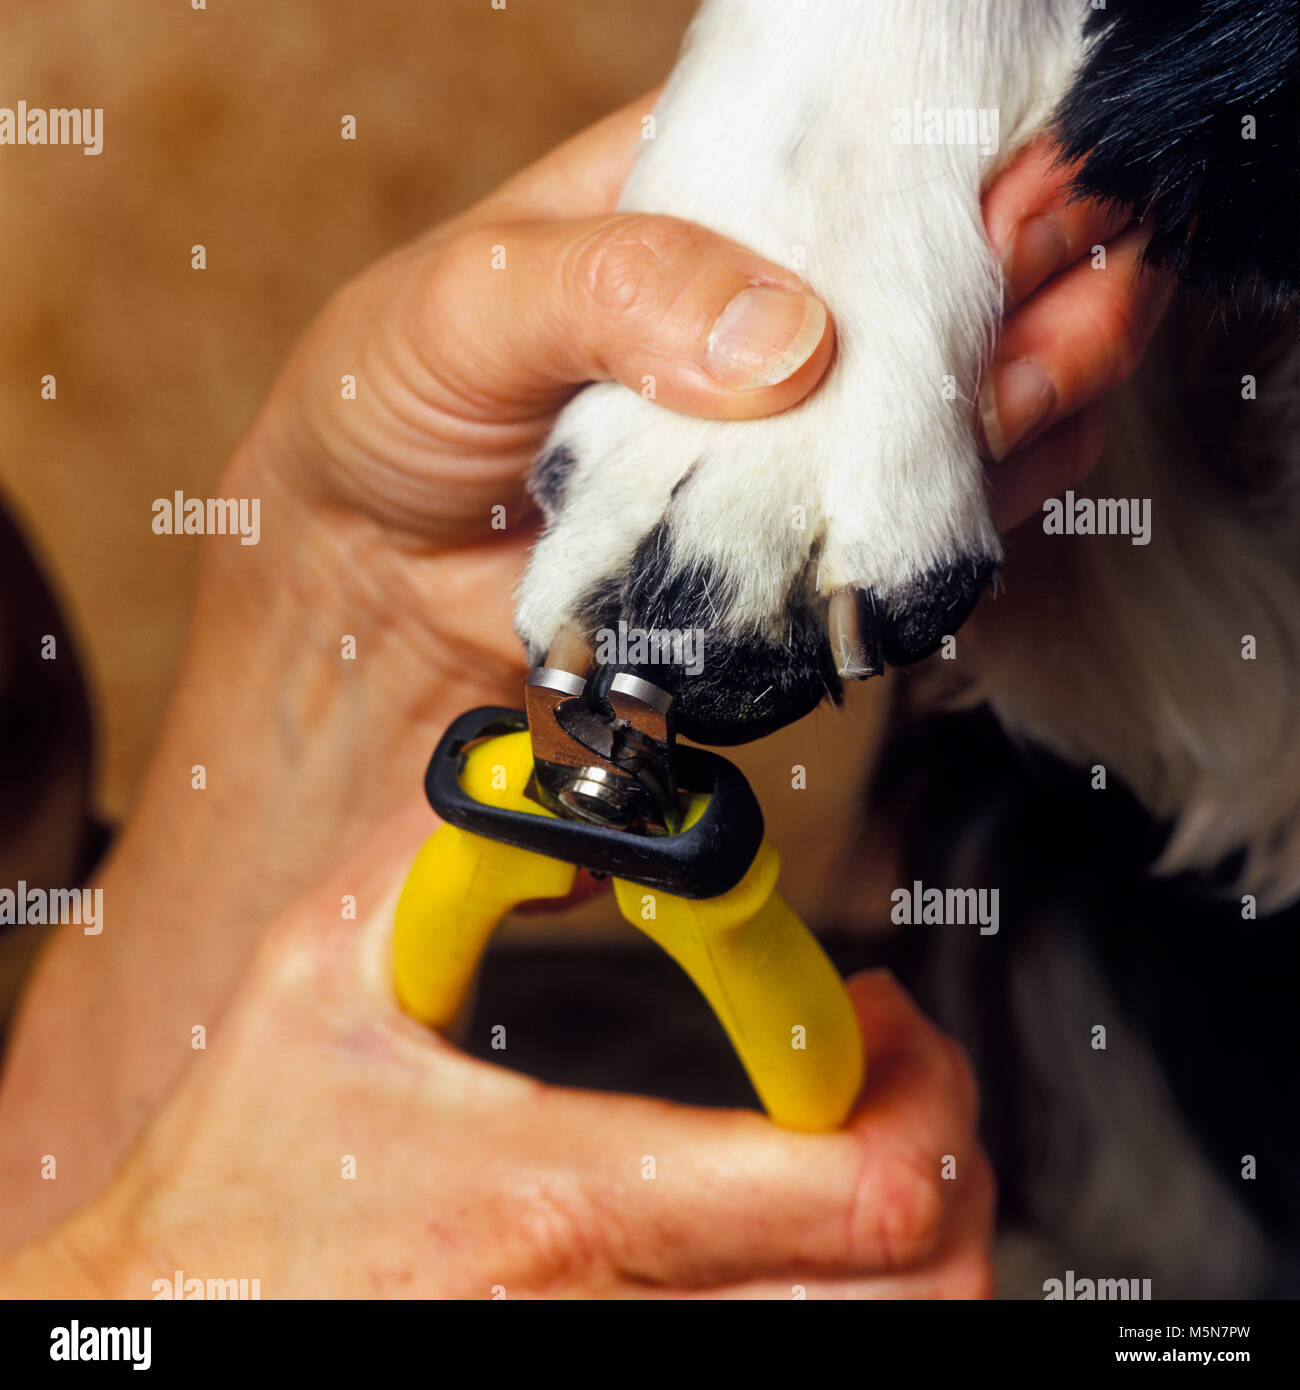 Cuting claws on a dog Stock Photo